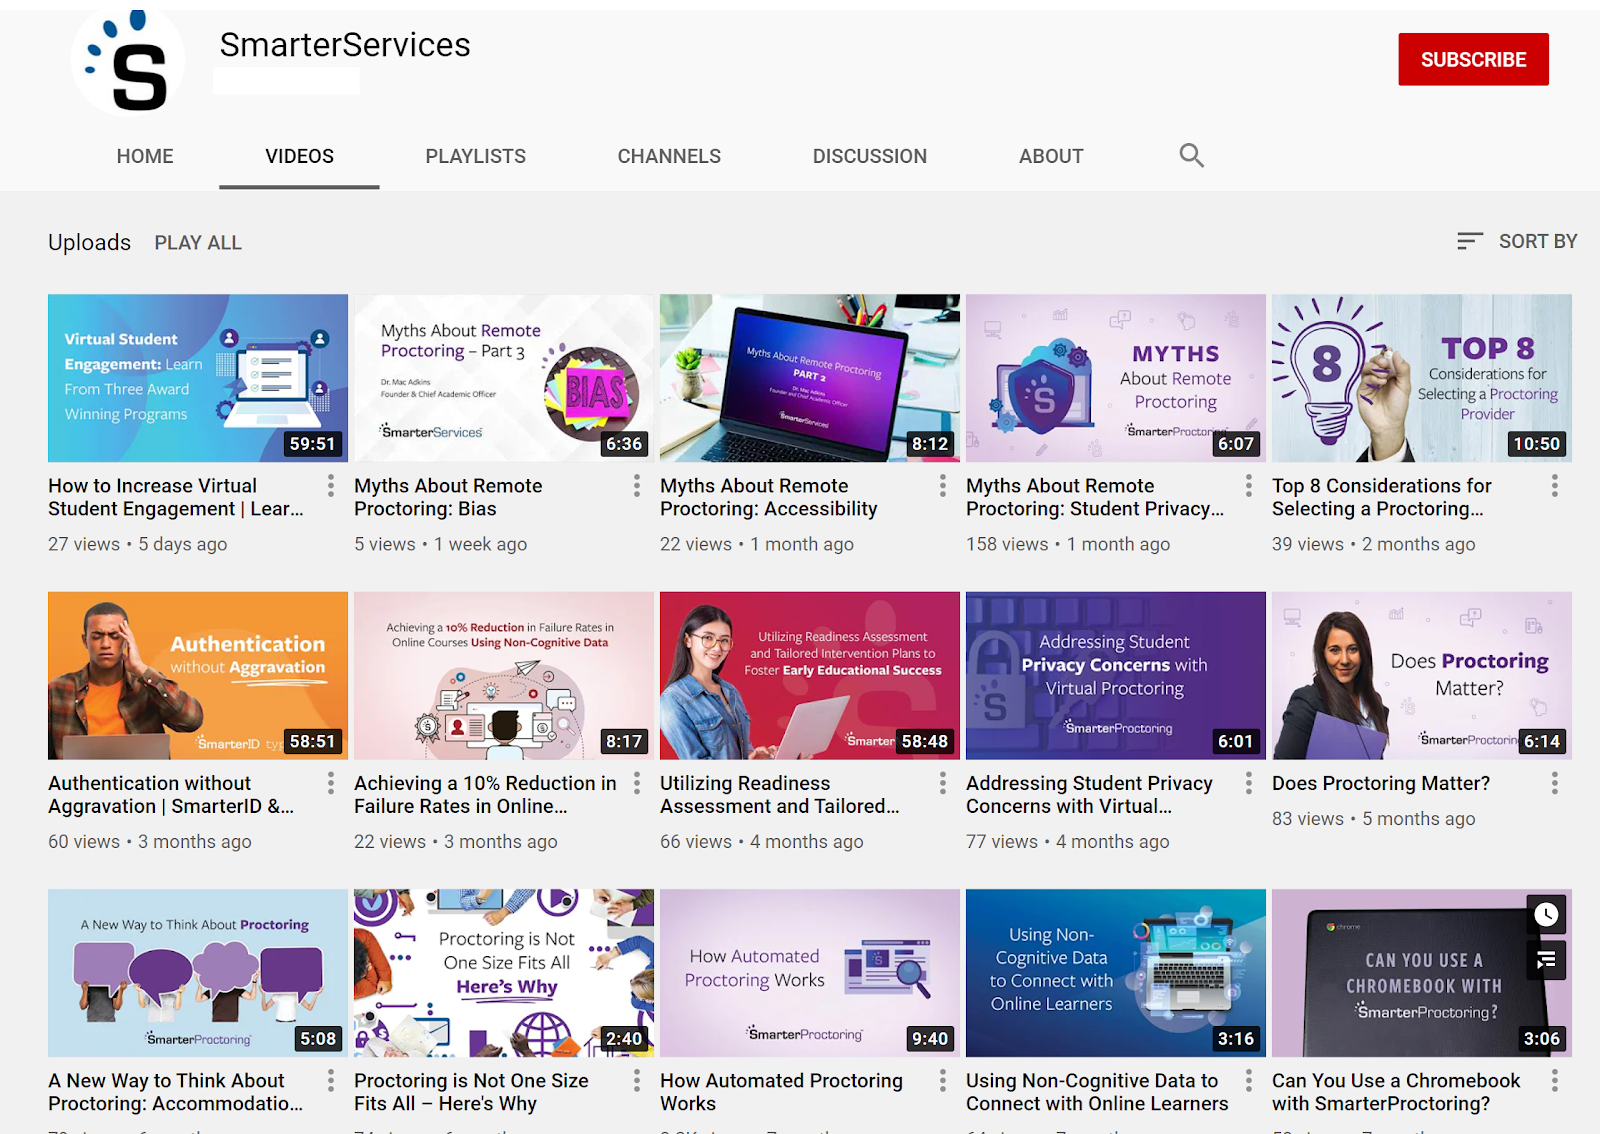 SmarterServices' YouTube Page